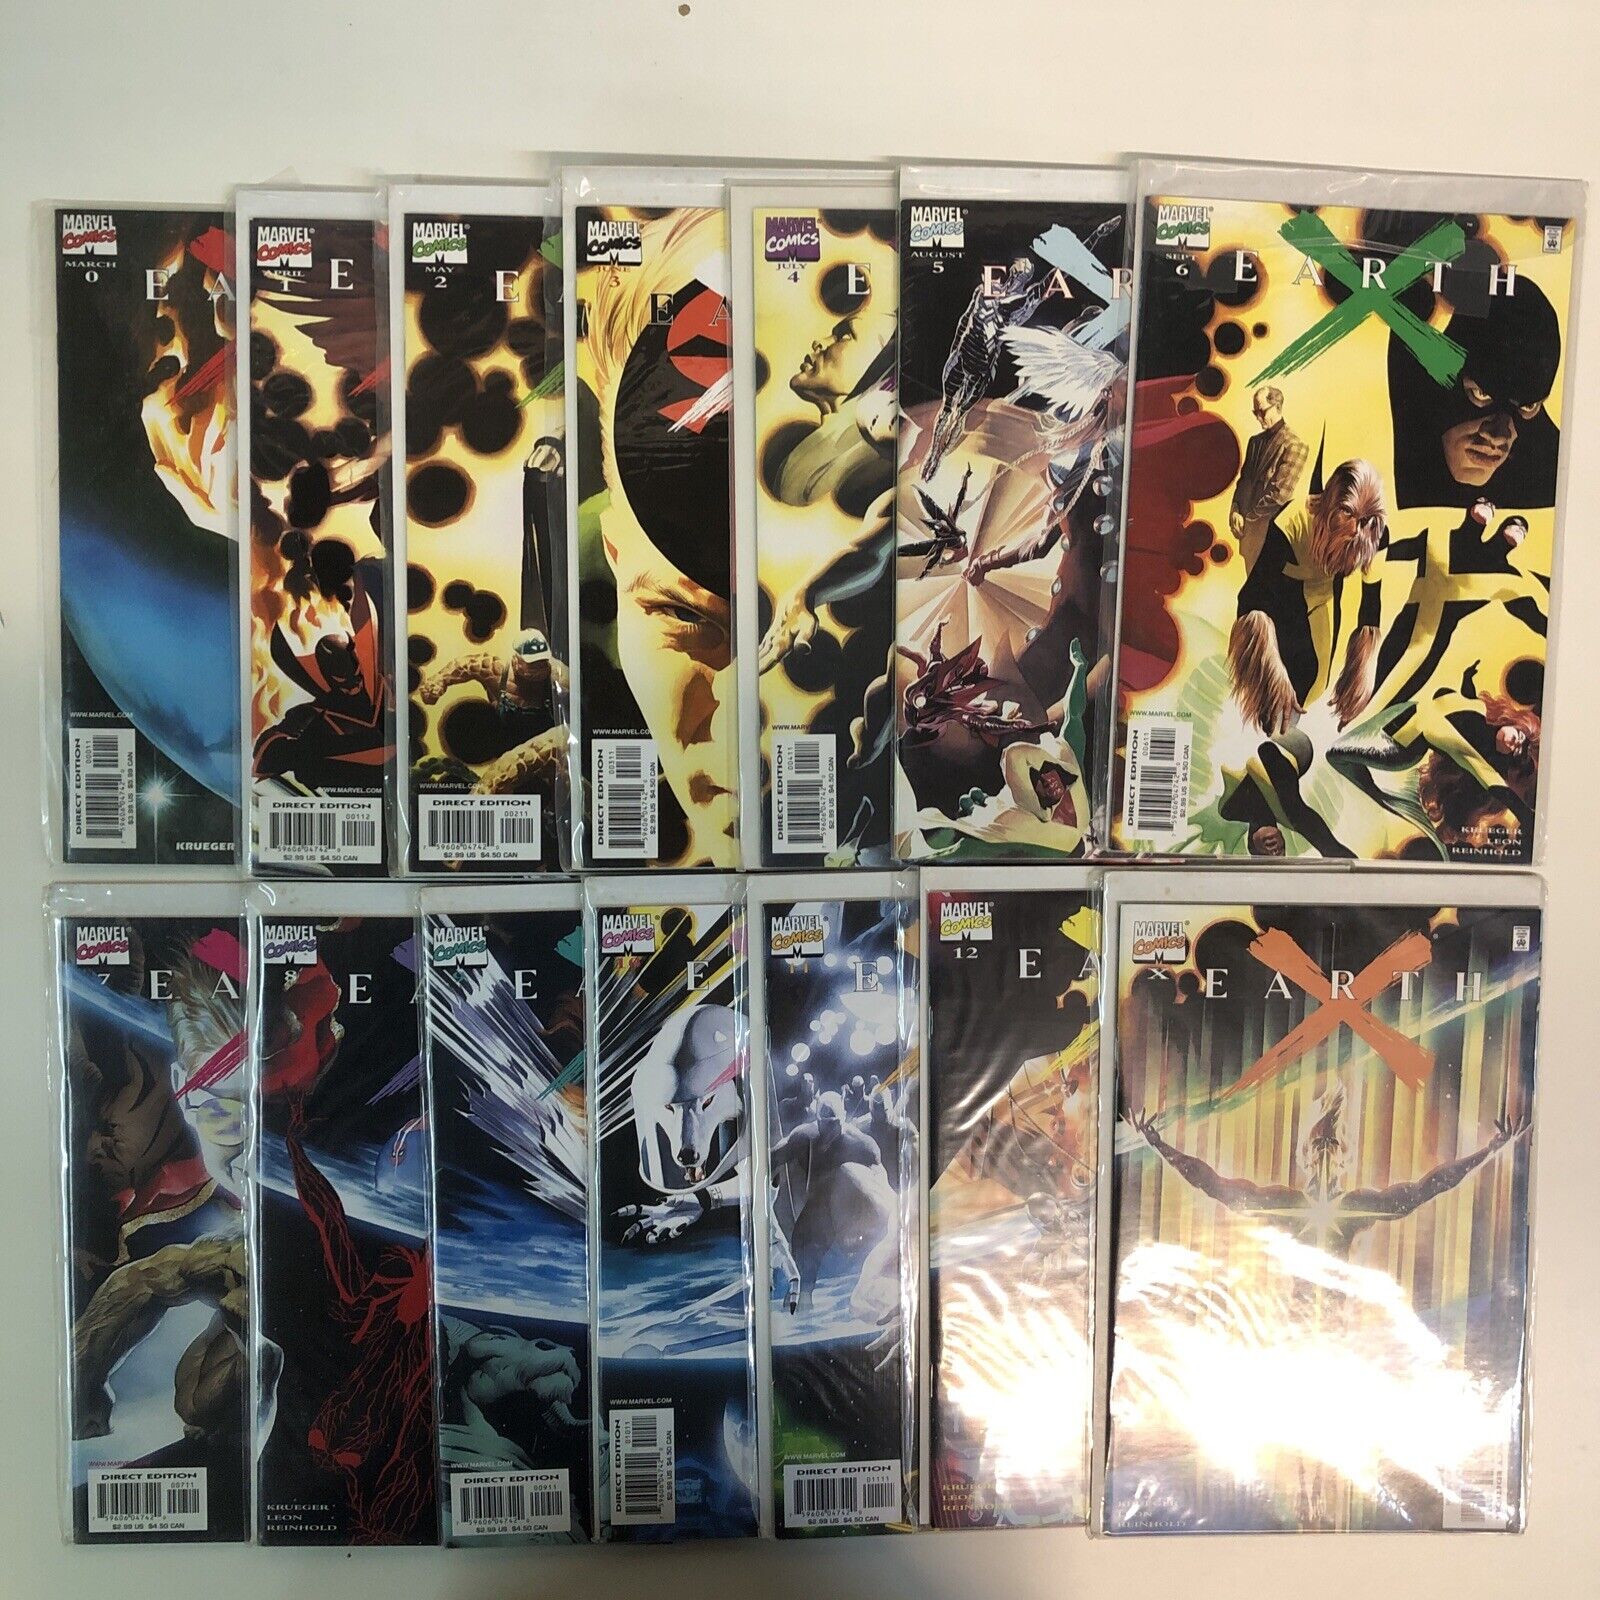 Earth X-Paradise X-Universe X (2001) X-0-1-12 & Special & Prelude (VF/NM) Marvel